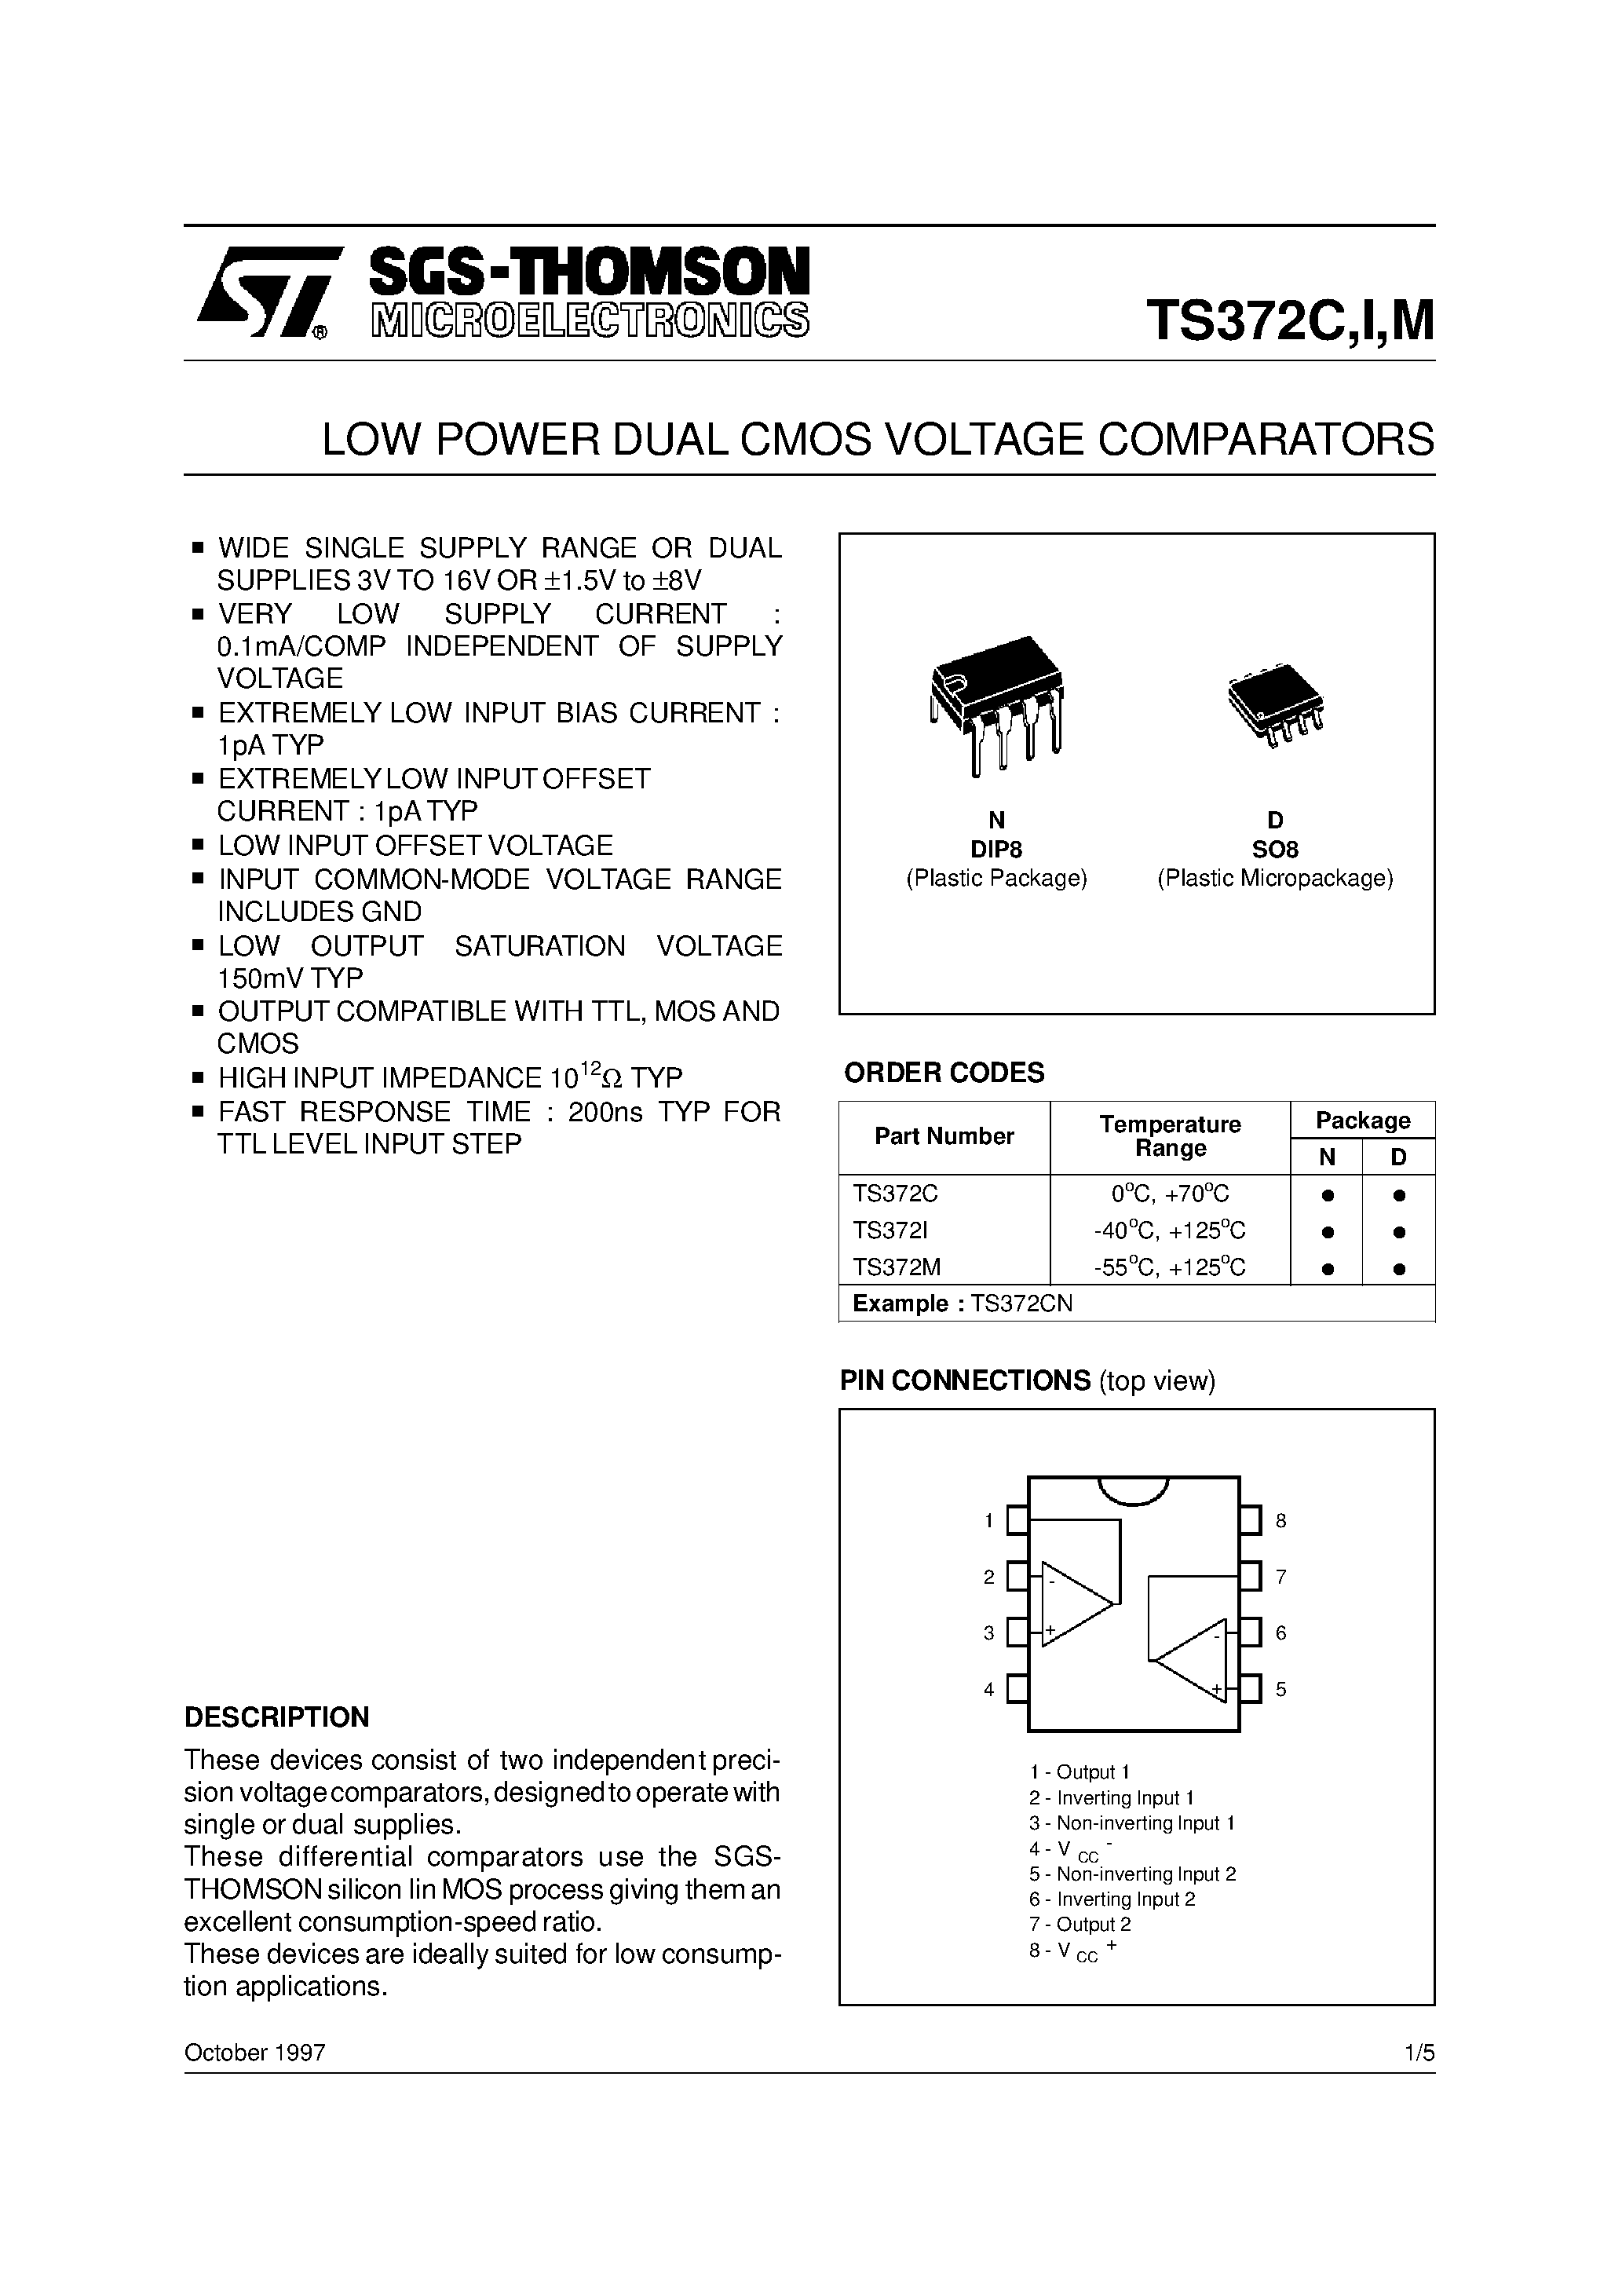 Datasheet TS372I - LOW POWER DUAL CMOS VOLTAGE COMPARATORS page 1